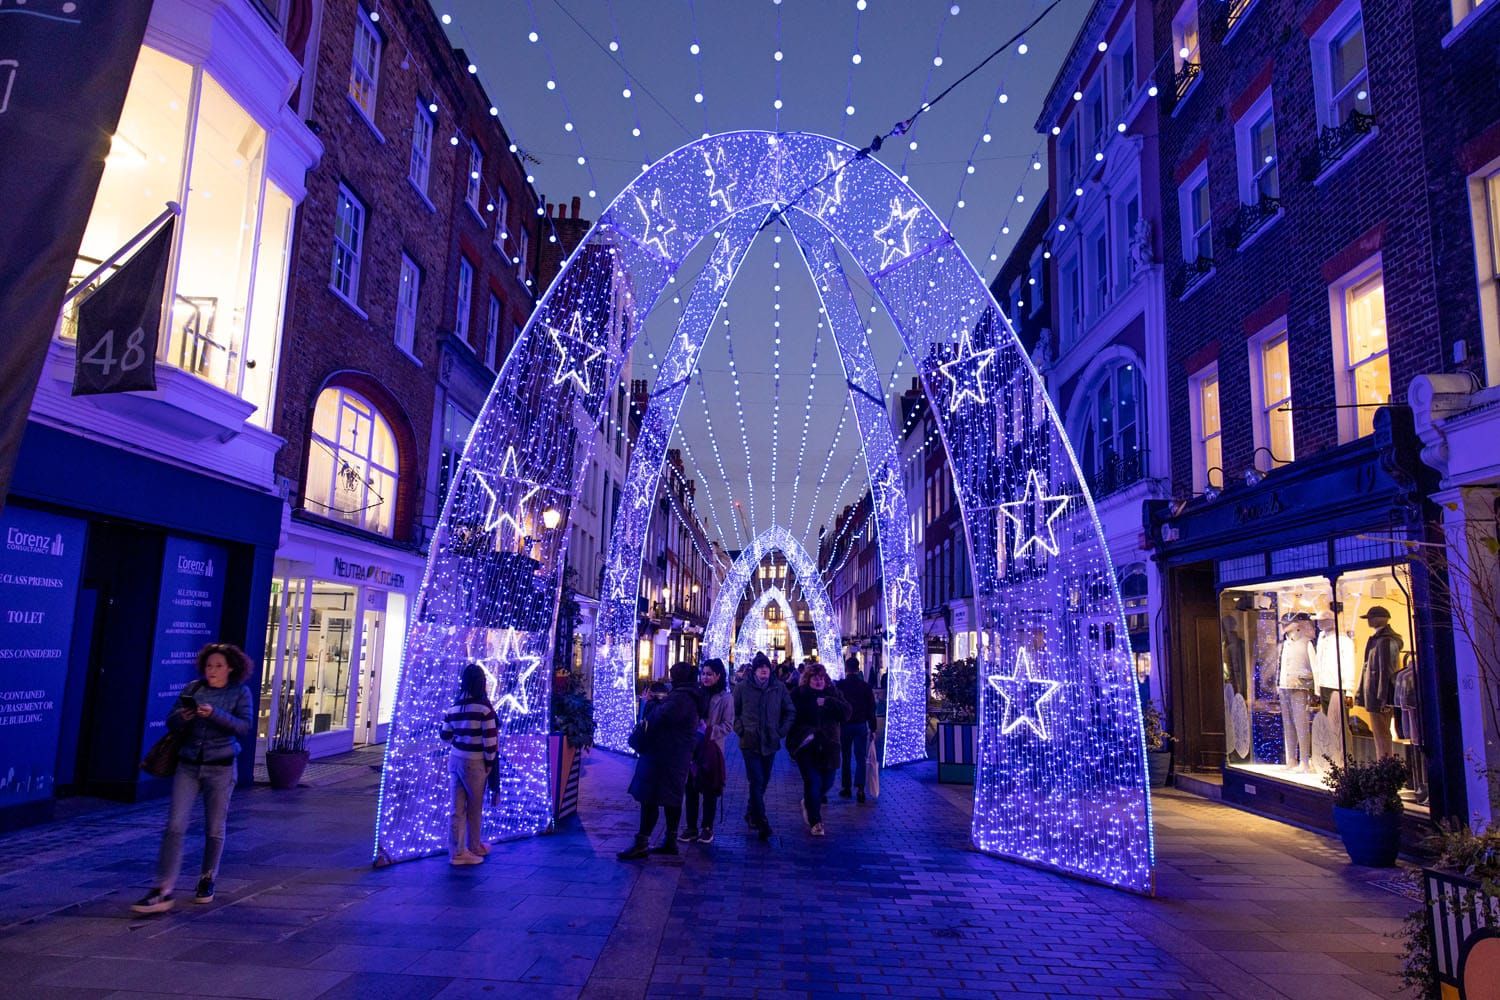 Mayfair London Christmas Lights | Things to do in London at Christmas